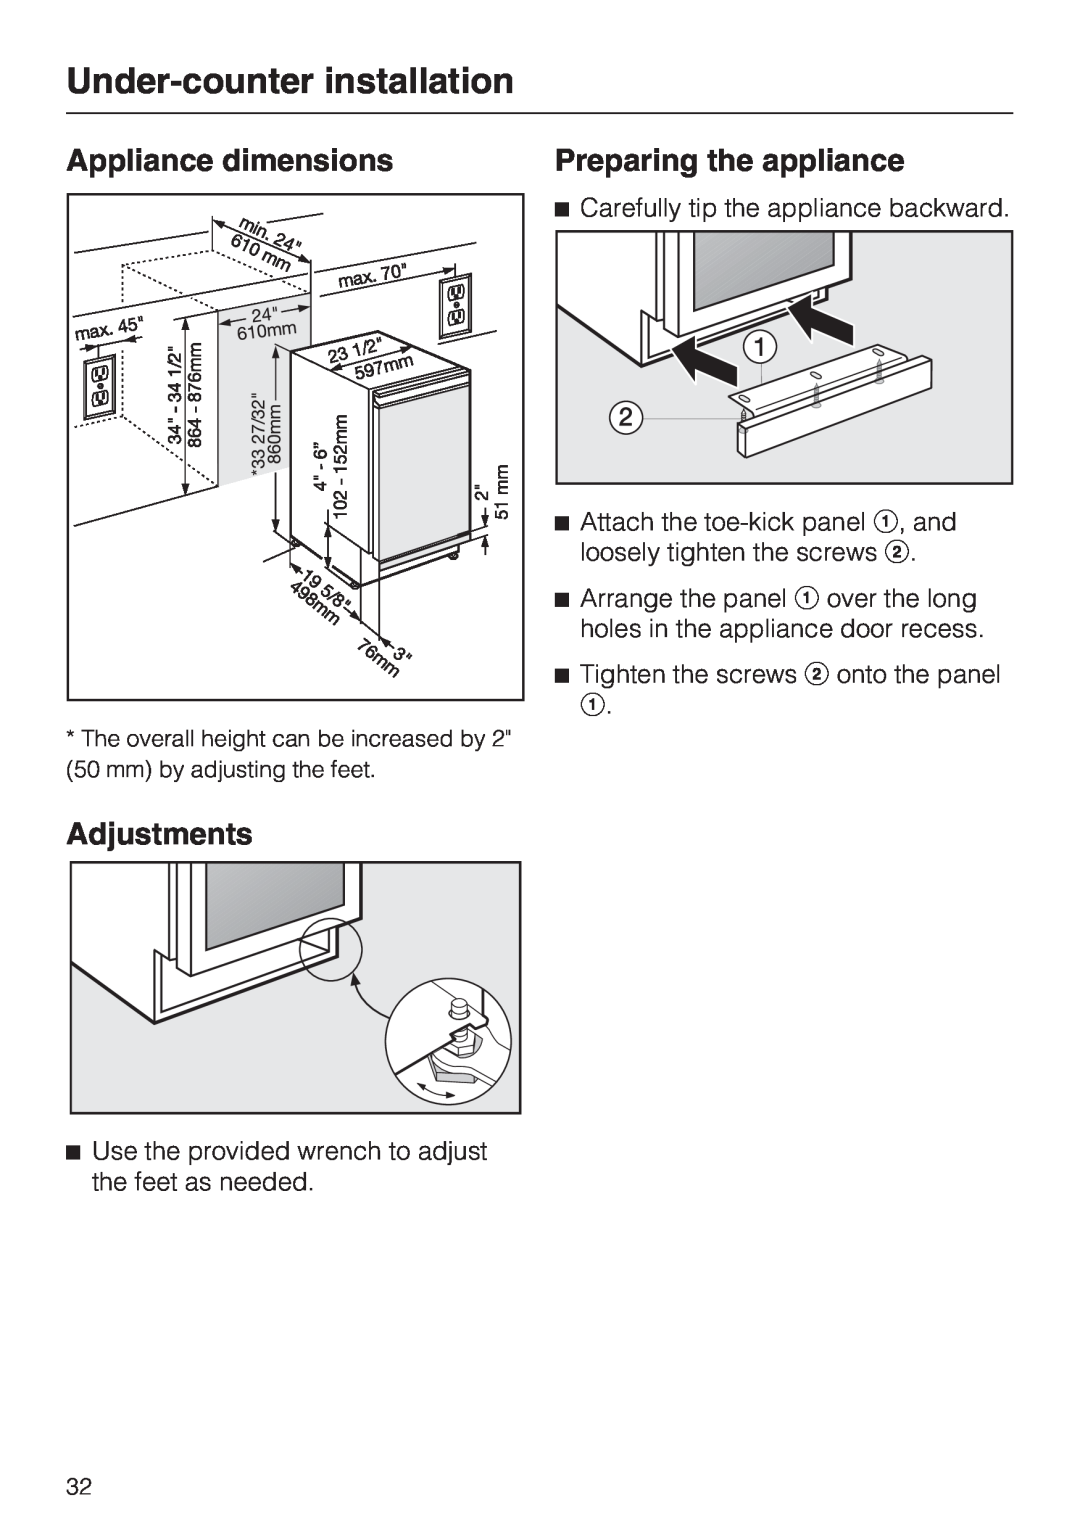 Miele KWT 4154 UG-1 Under-counterinstallation, Appliance dimensions, Adjustments, Preparing the appliance 